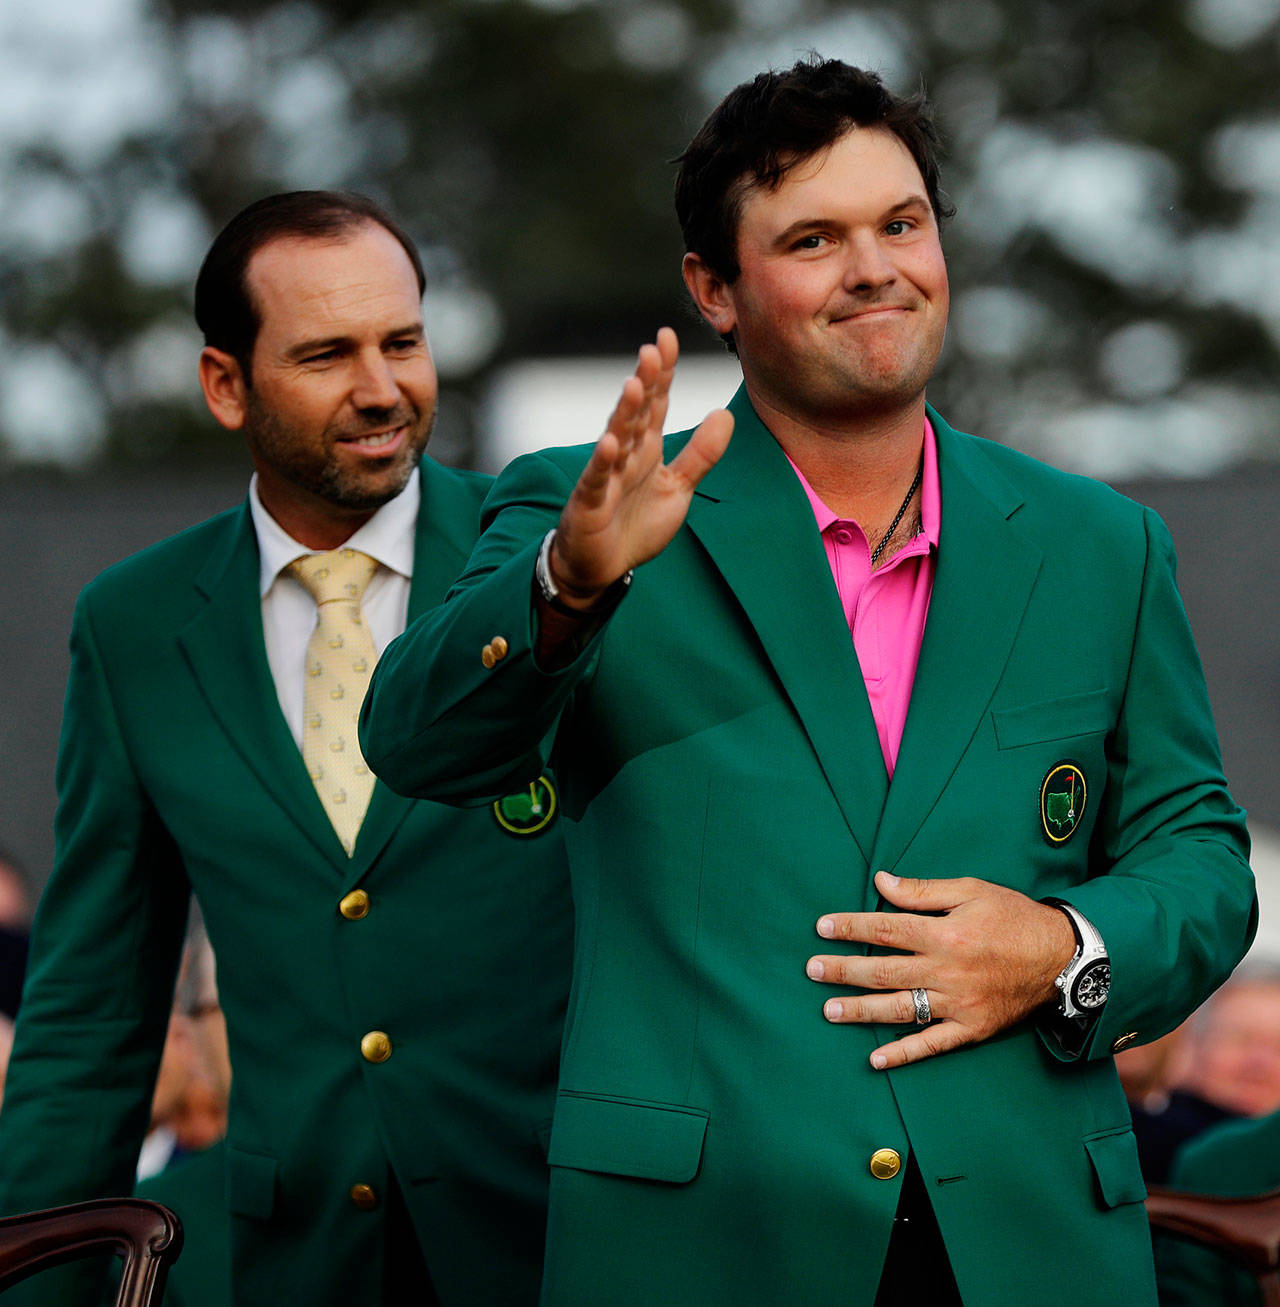 Last year’s Masters champion, Sergio Garcia (left), watches as Patrick Reed waves to spectators after Reed won the Masters on Sunday in Augusta, Ga. (AP Photo/David J. Phillip)